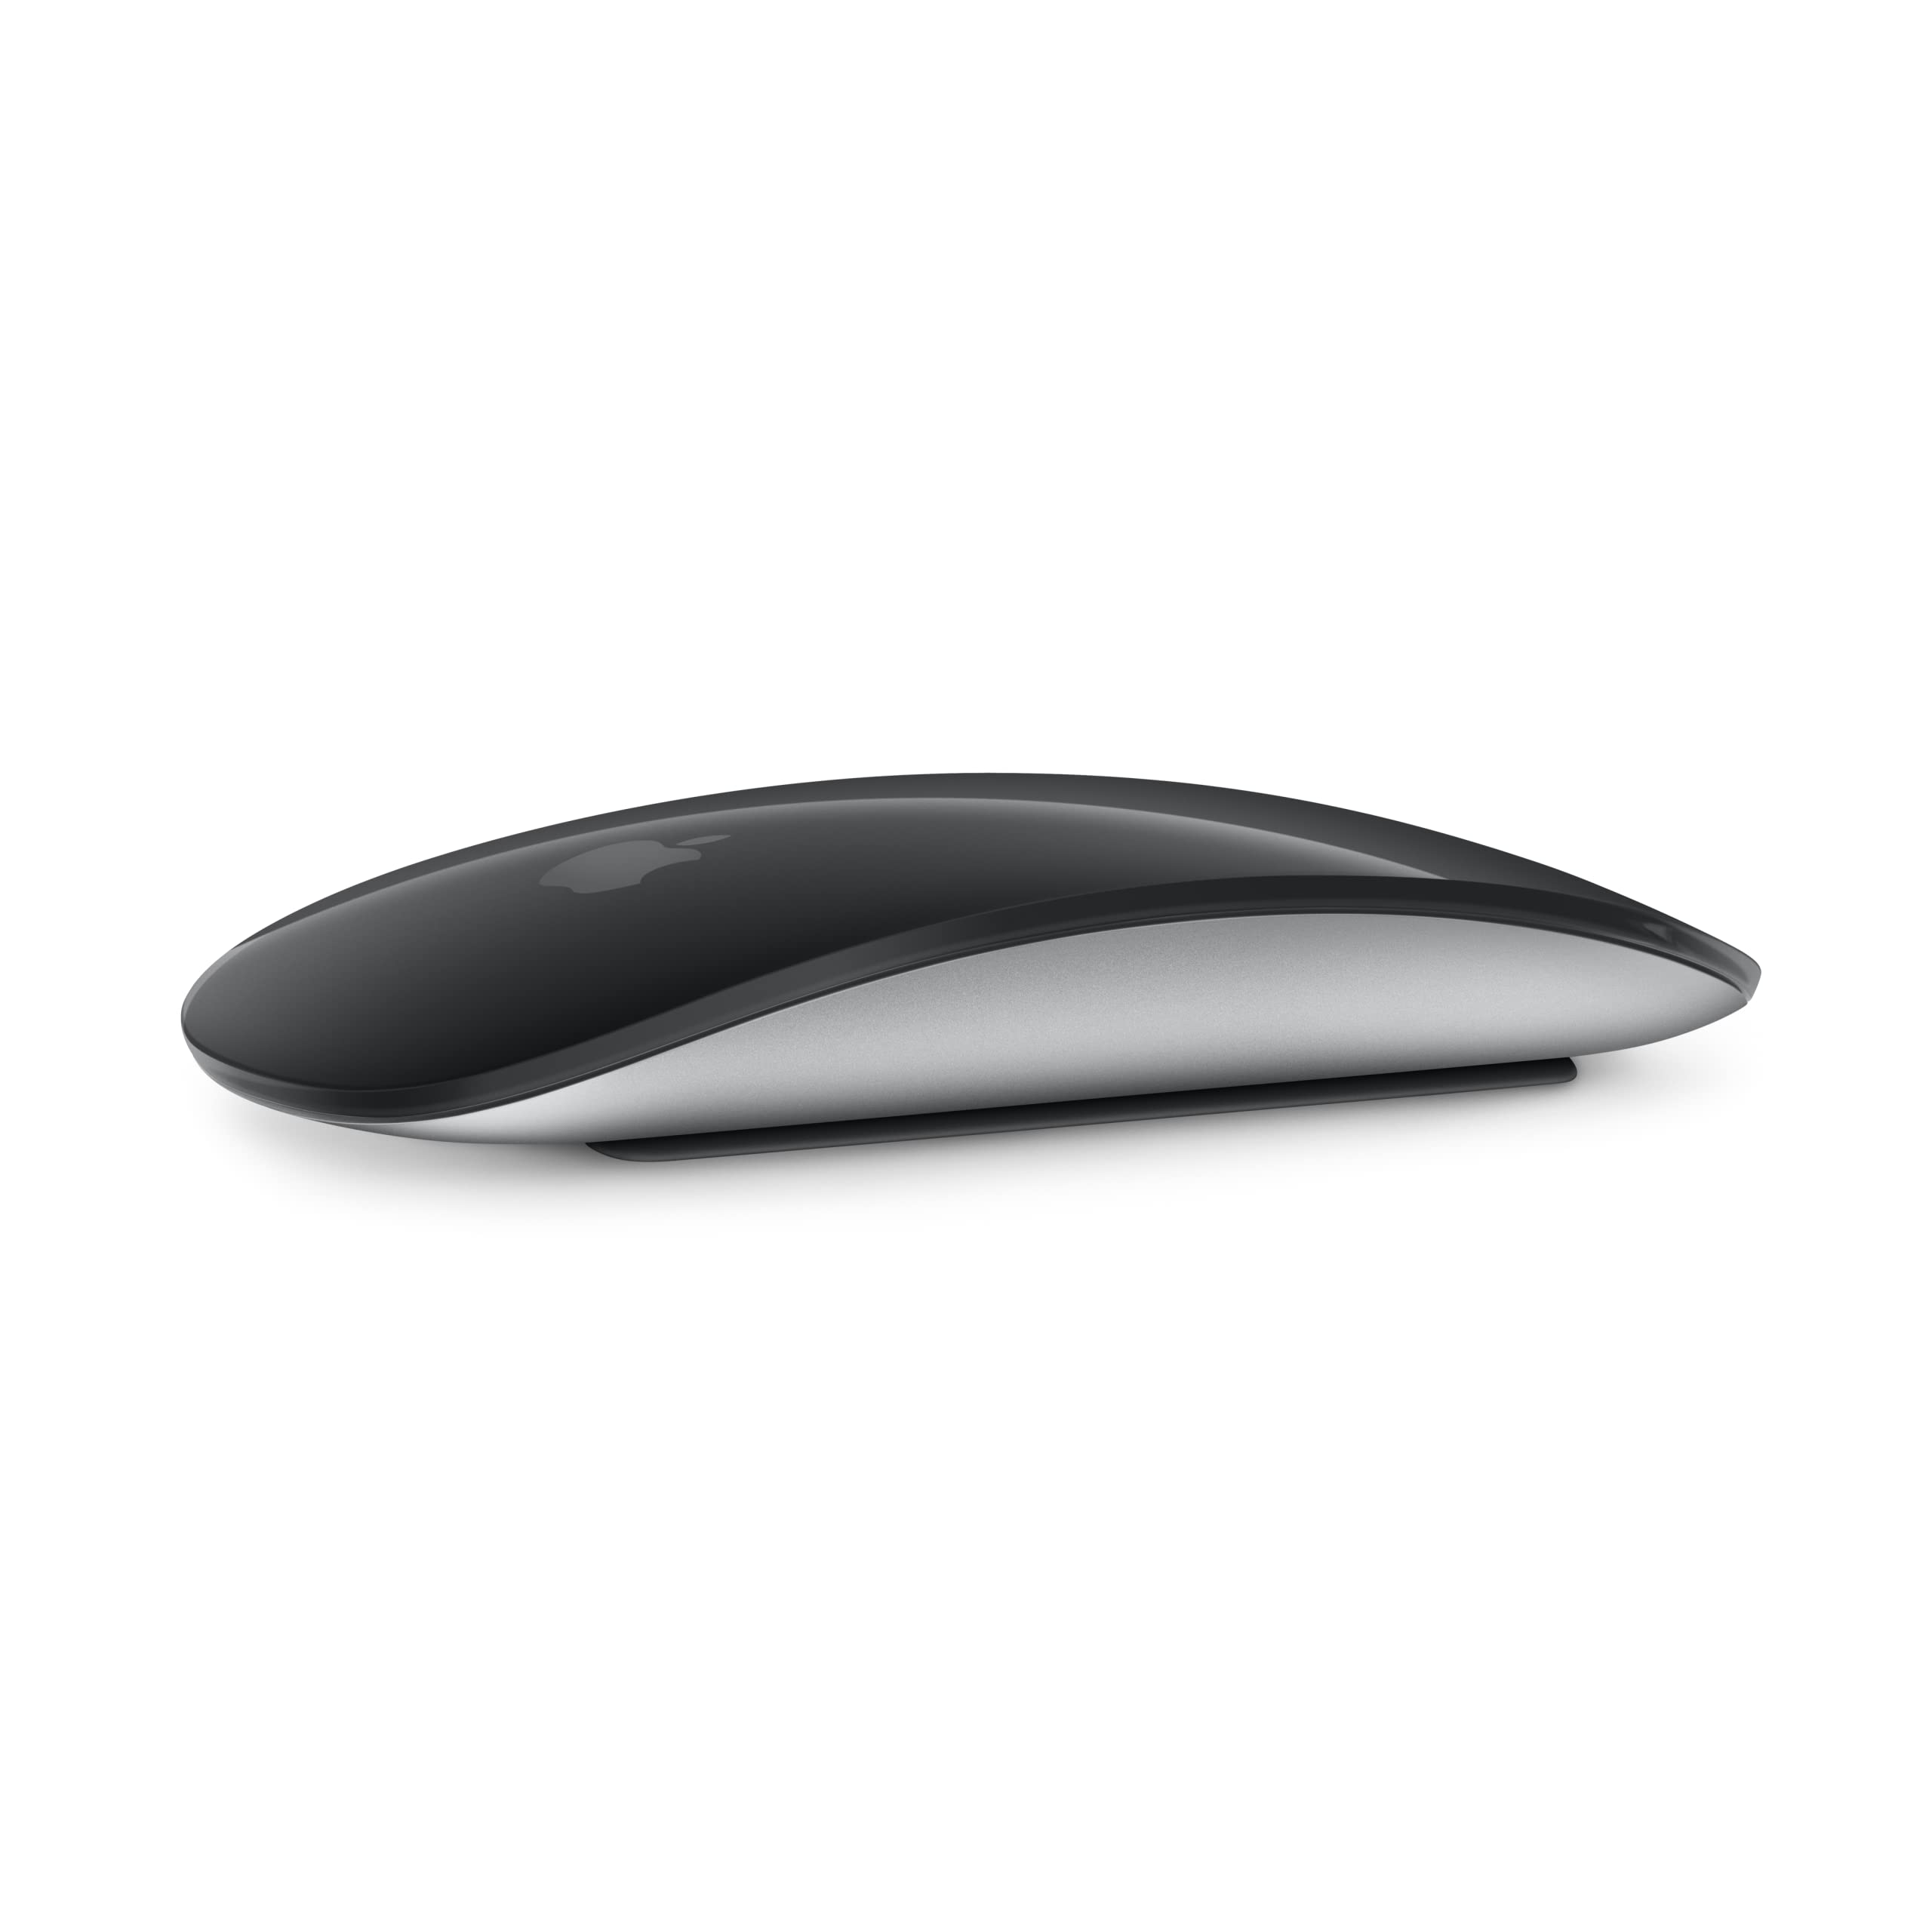 Apple Magic Mouse: Wireless, Bluetooth, Rechargeable. Works with Mac or iPad; Black, Multi-Touch Surface